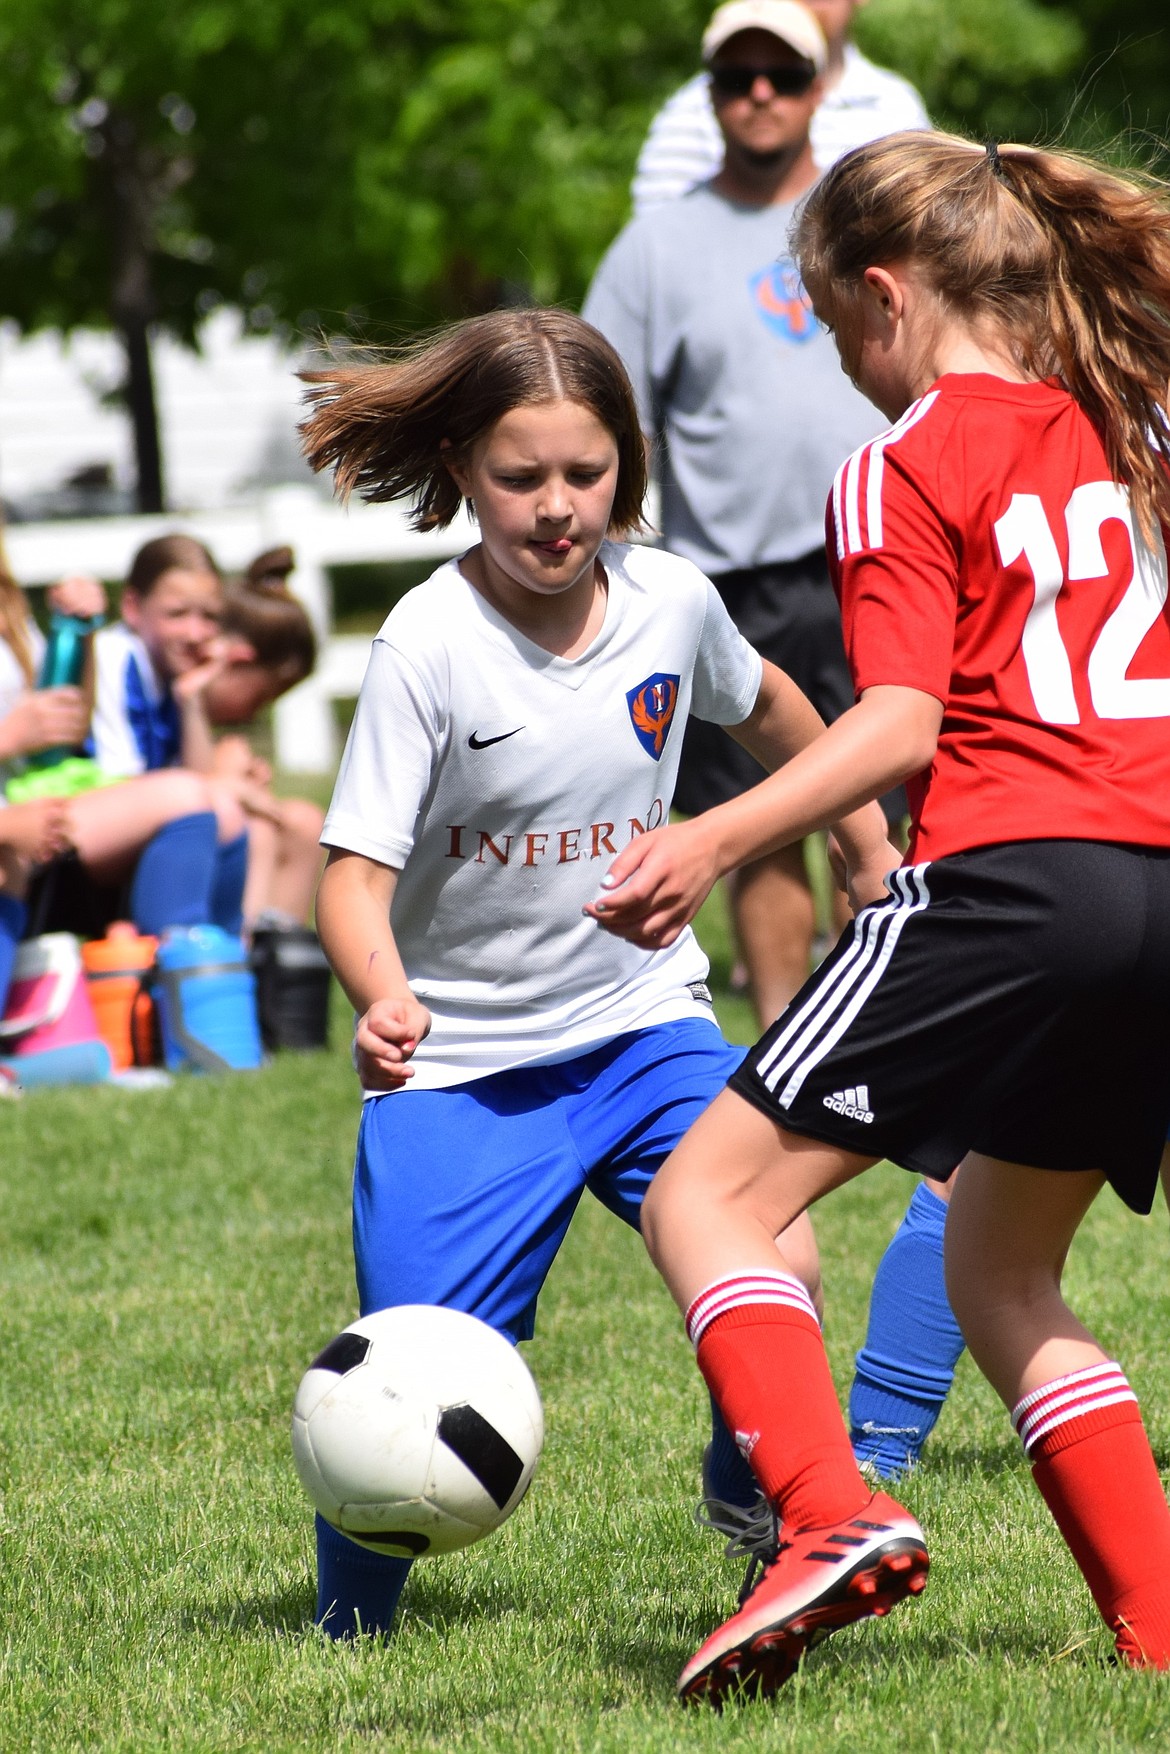 Courtesy photo
Mallory Judd of the North Idaho Inferno FC Hartzell 07 girls team drives through a defender to connect for an assist in a game against IEYSA G07 Storm FC Bertelsen-Richards.